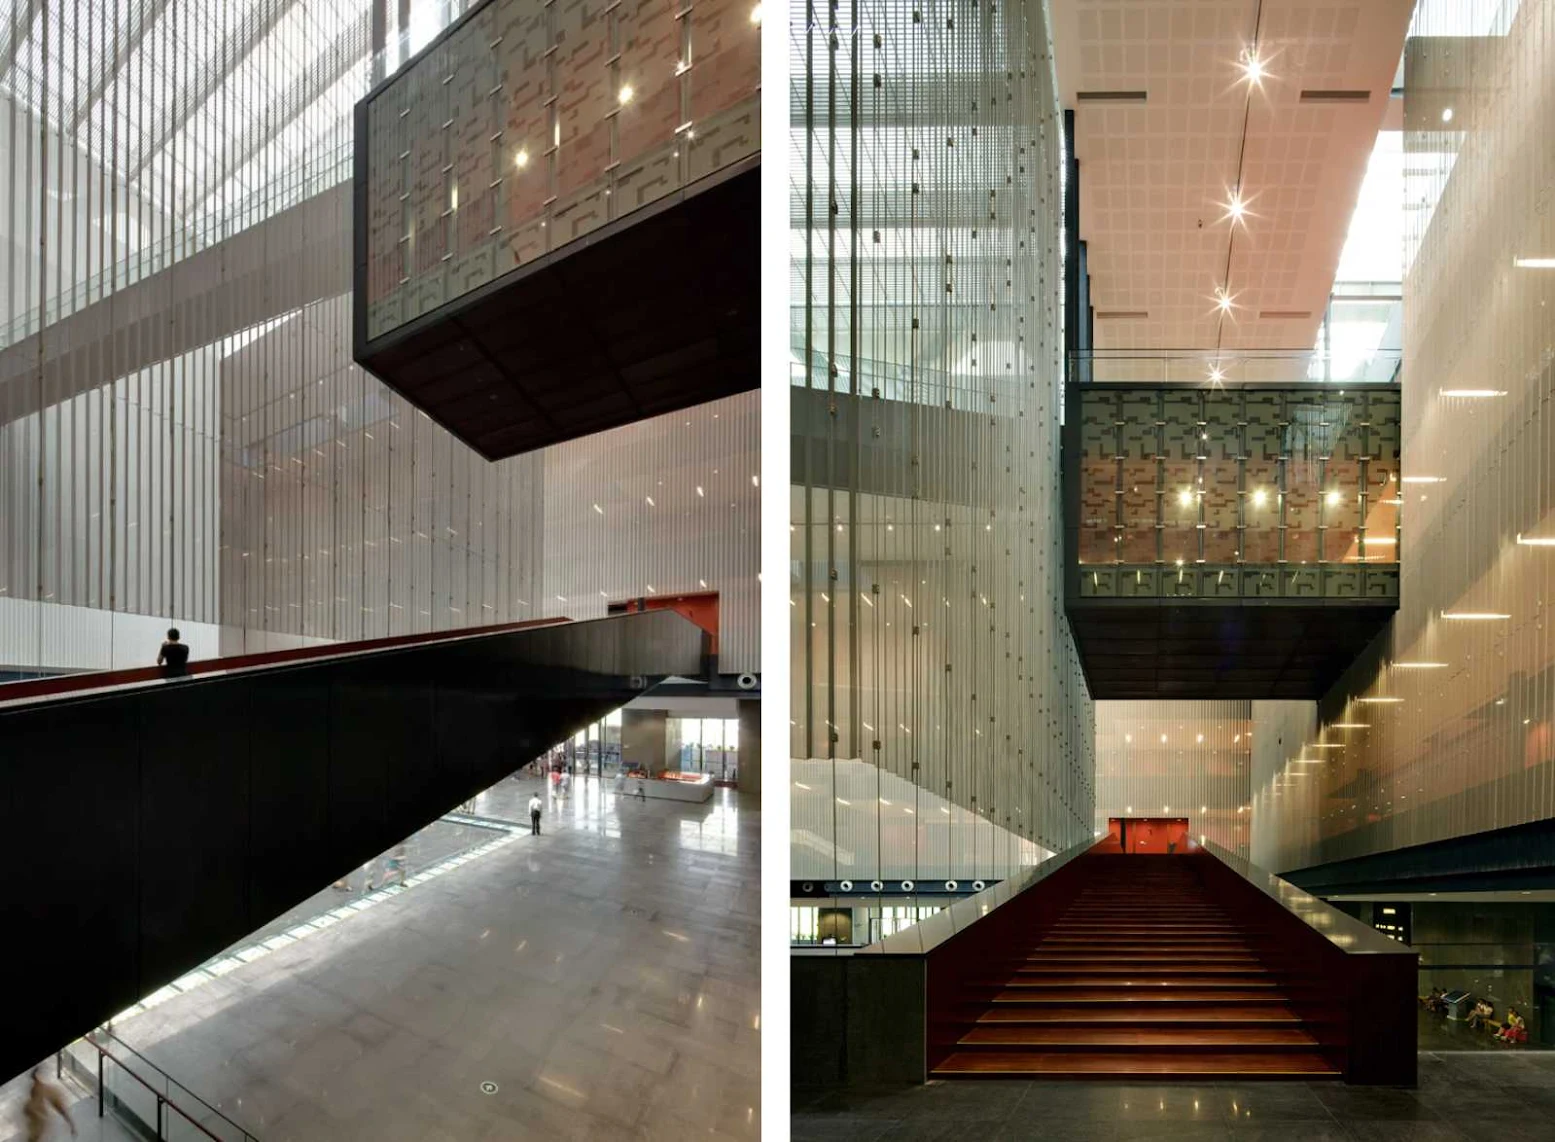 Guangdong Museum by Rocco Design Architects